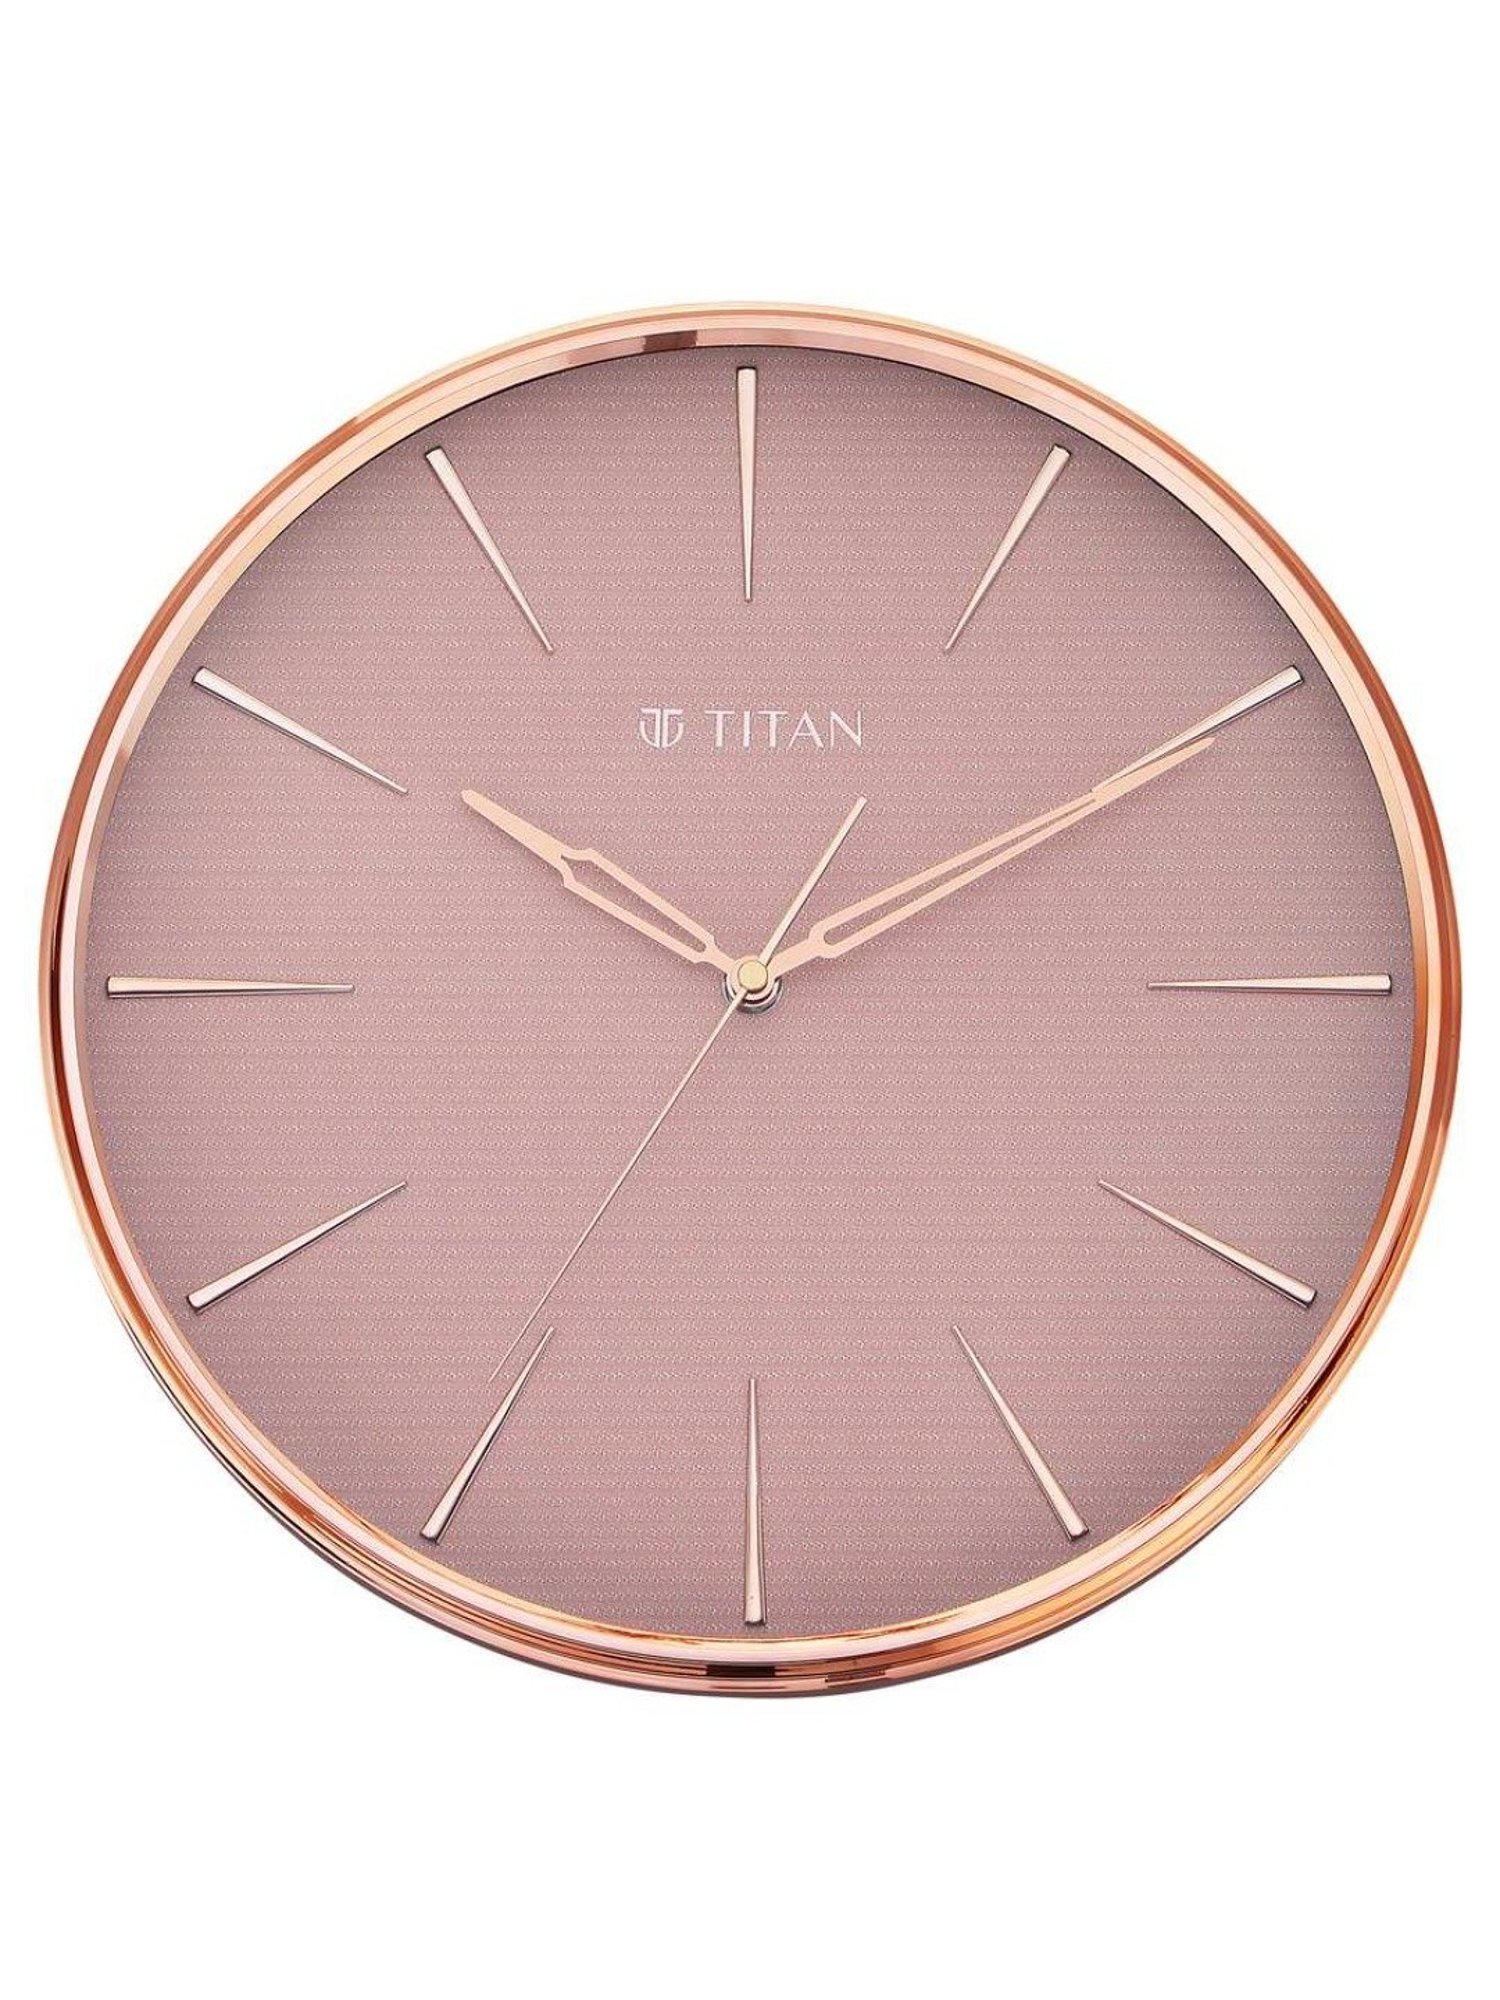 Festival Titan Wall Clock, Size: 27cm X 27cm, Model Name/Number: W0010PA02  at Rs 1395/piece in Mumbai